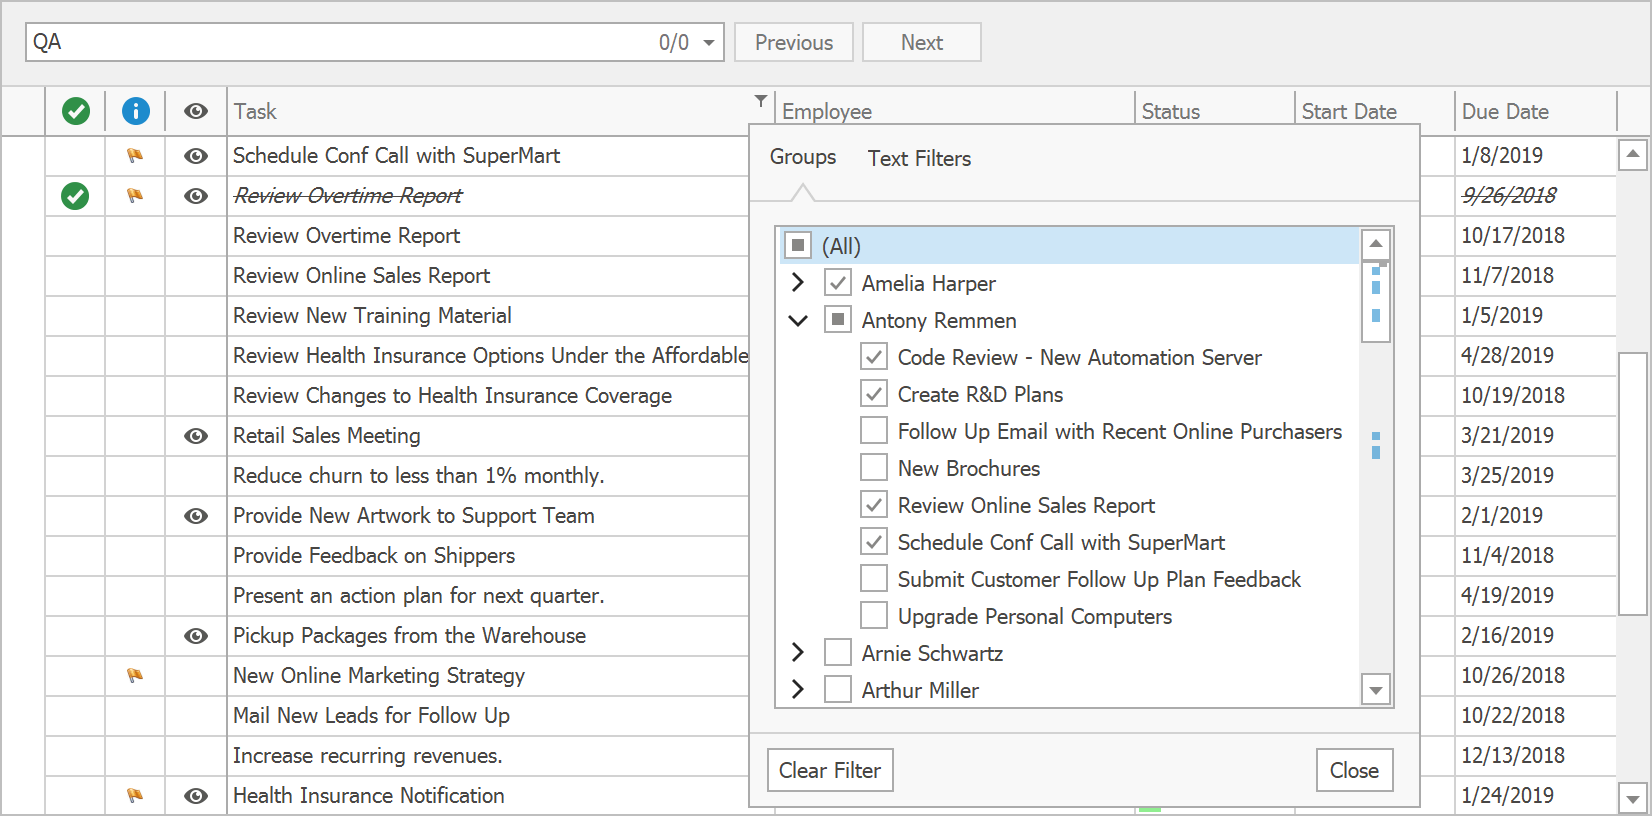 Excel-inspired Group Filters - WinForms Grid Control, DevExpress